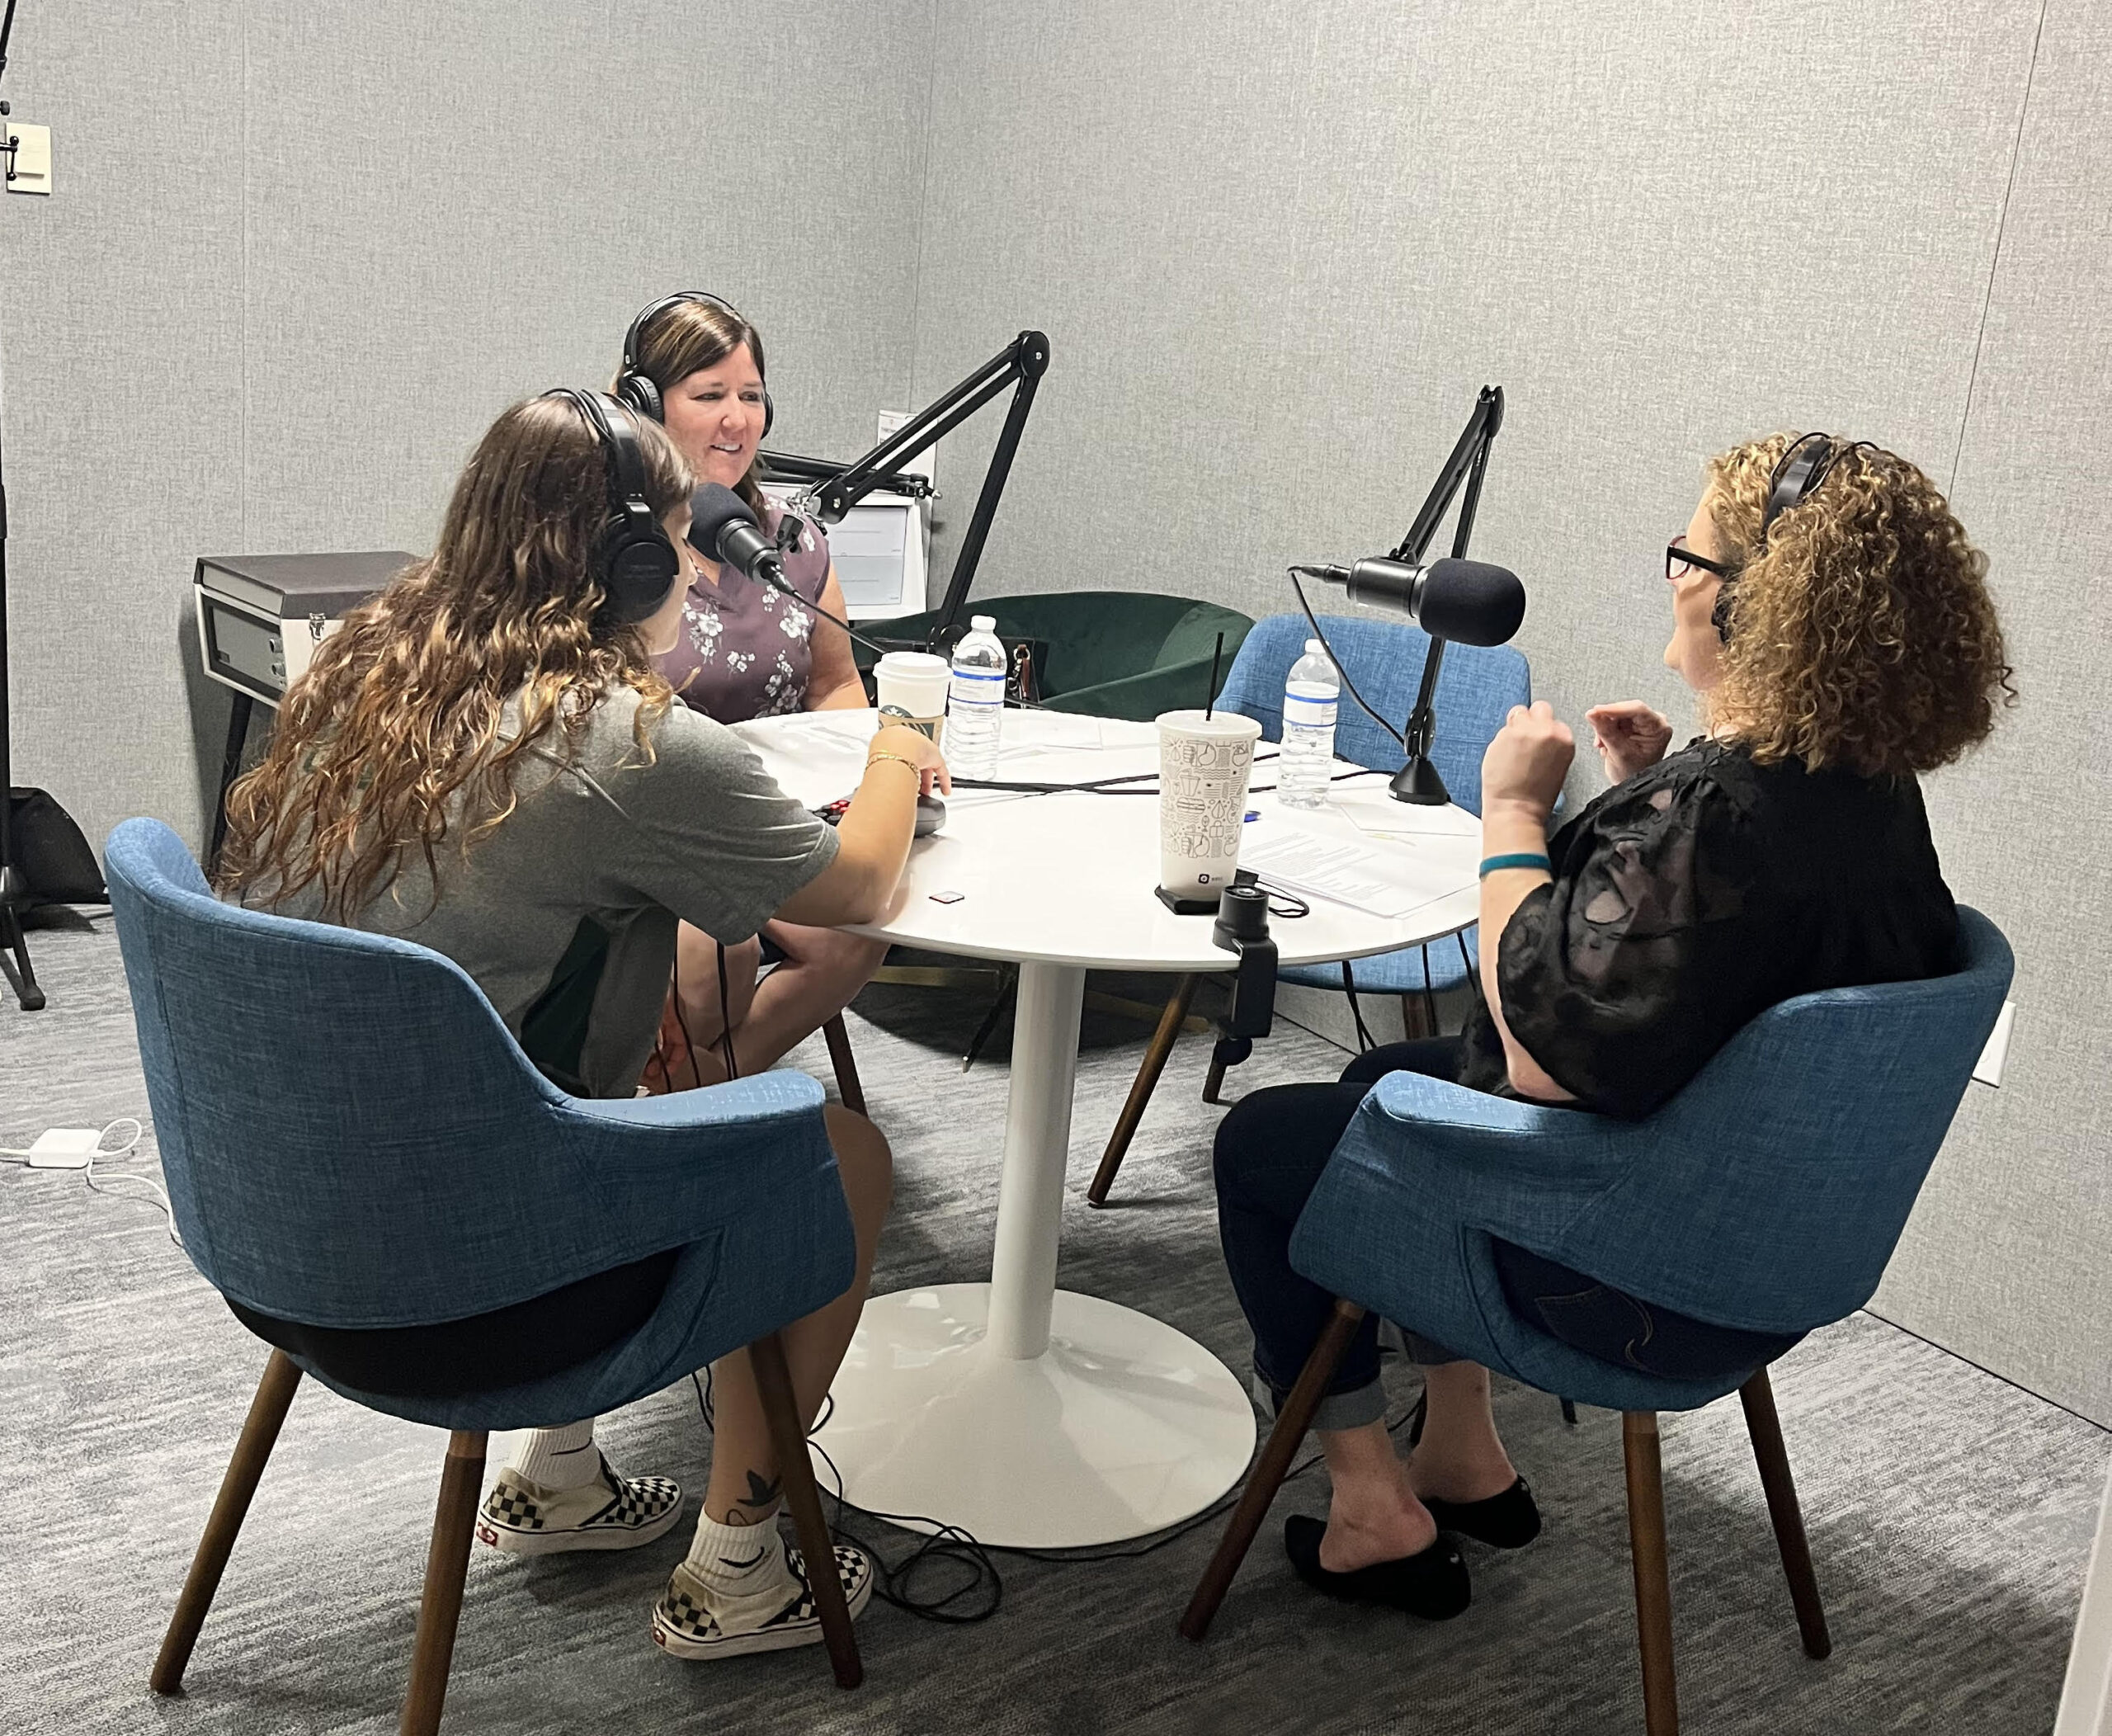 Podcast for new master’s program centers disabilities